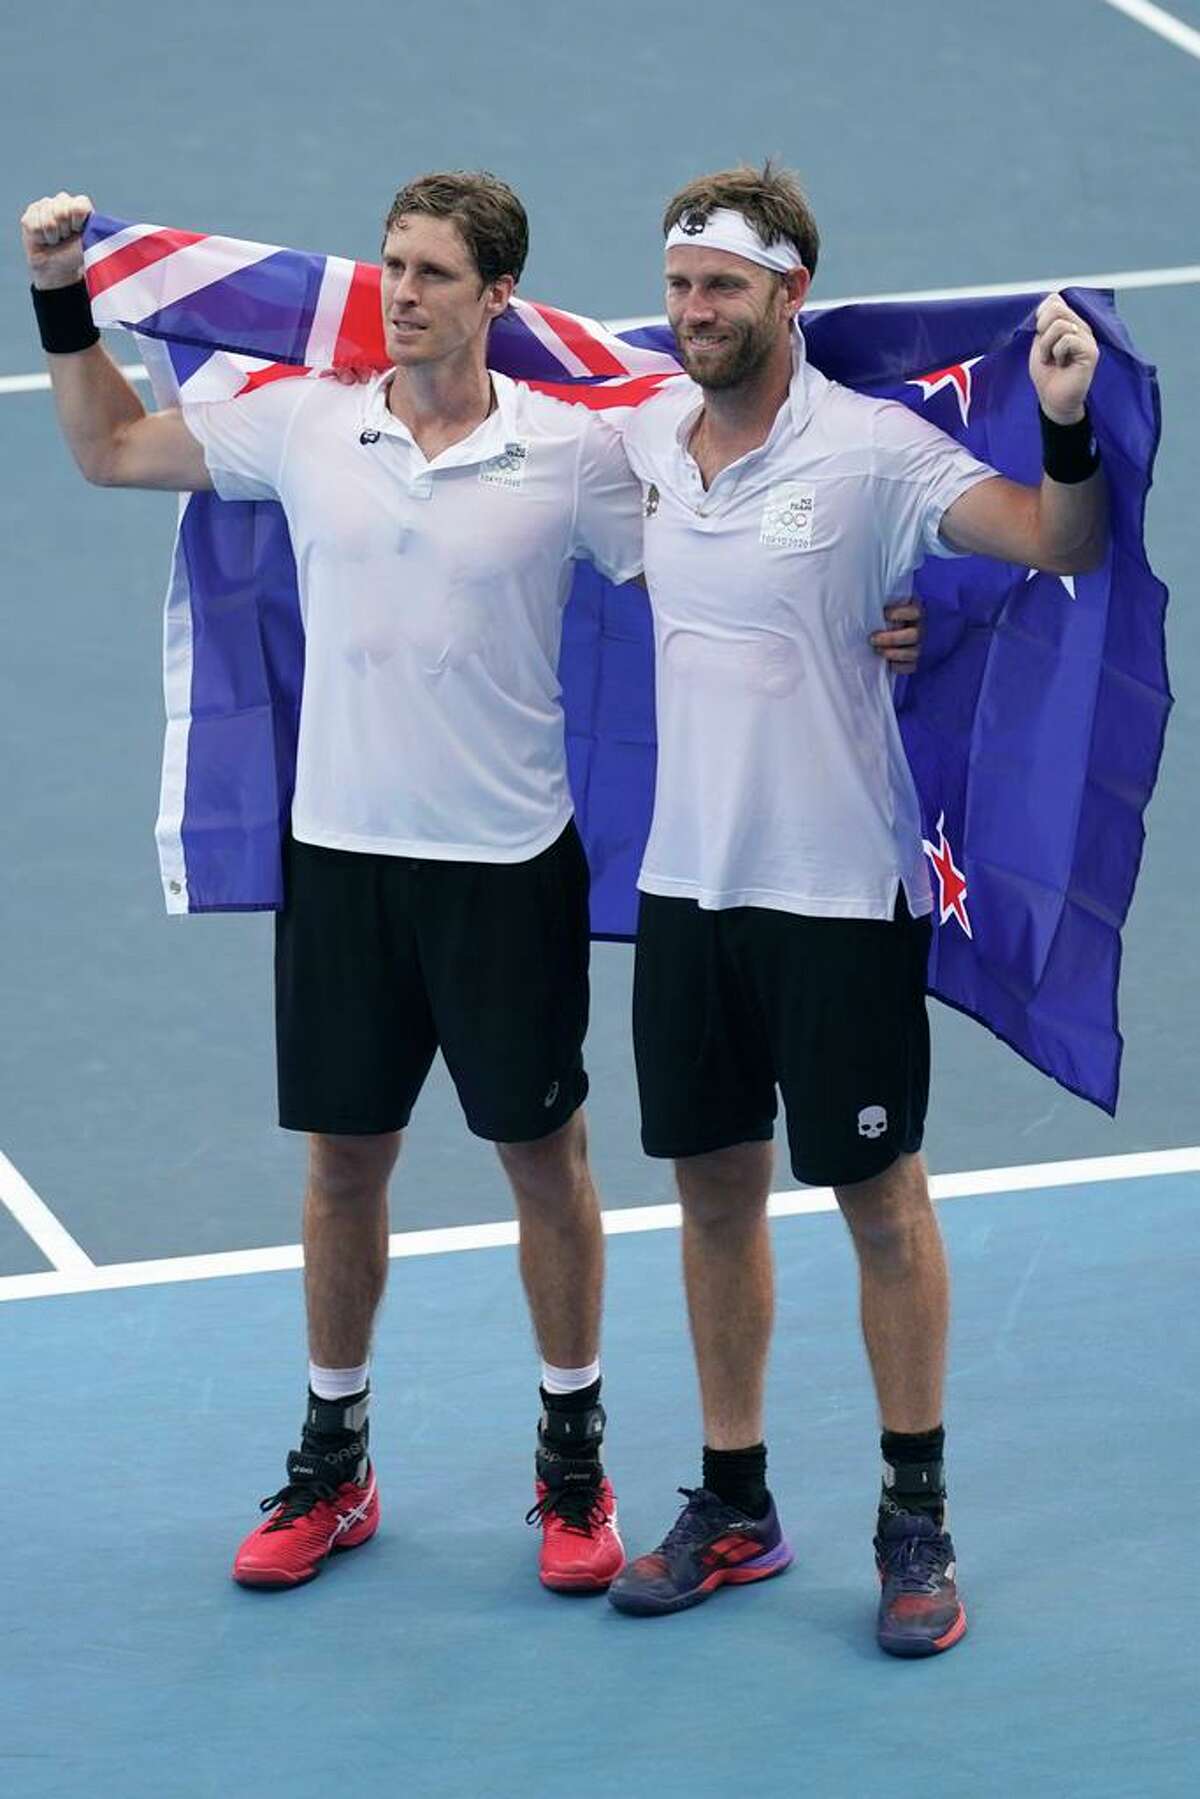 The New Zealand doubles team of Michael Venus, right, and Marcus Daniell celebrate with the flag of their country after defeating the team from the United States during the men's doubles bronze medal match of the tennis competition at the 2020 Summer Olympics, Friday, July 30, 2021, in Tokyo, Japan. Daniell practiced in Salisbury, Conn. during the pandemic.